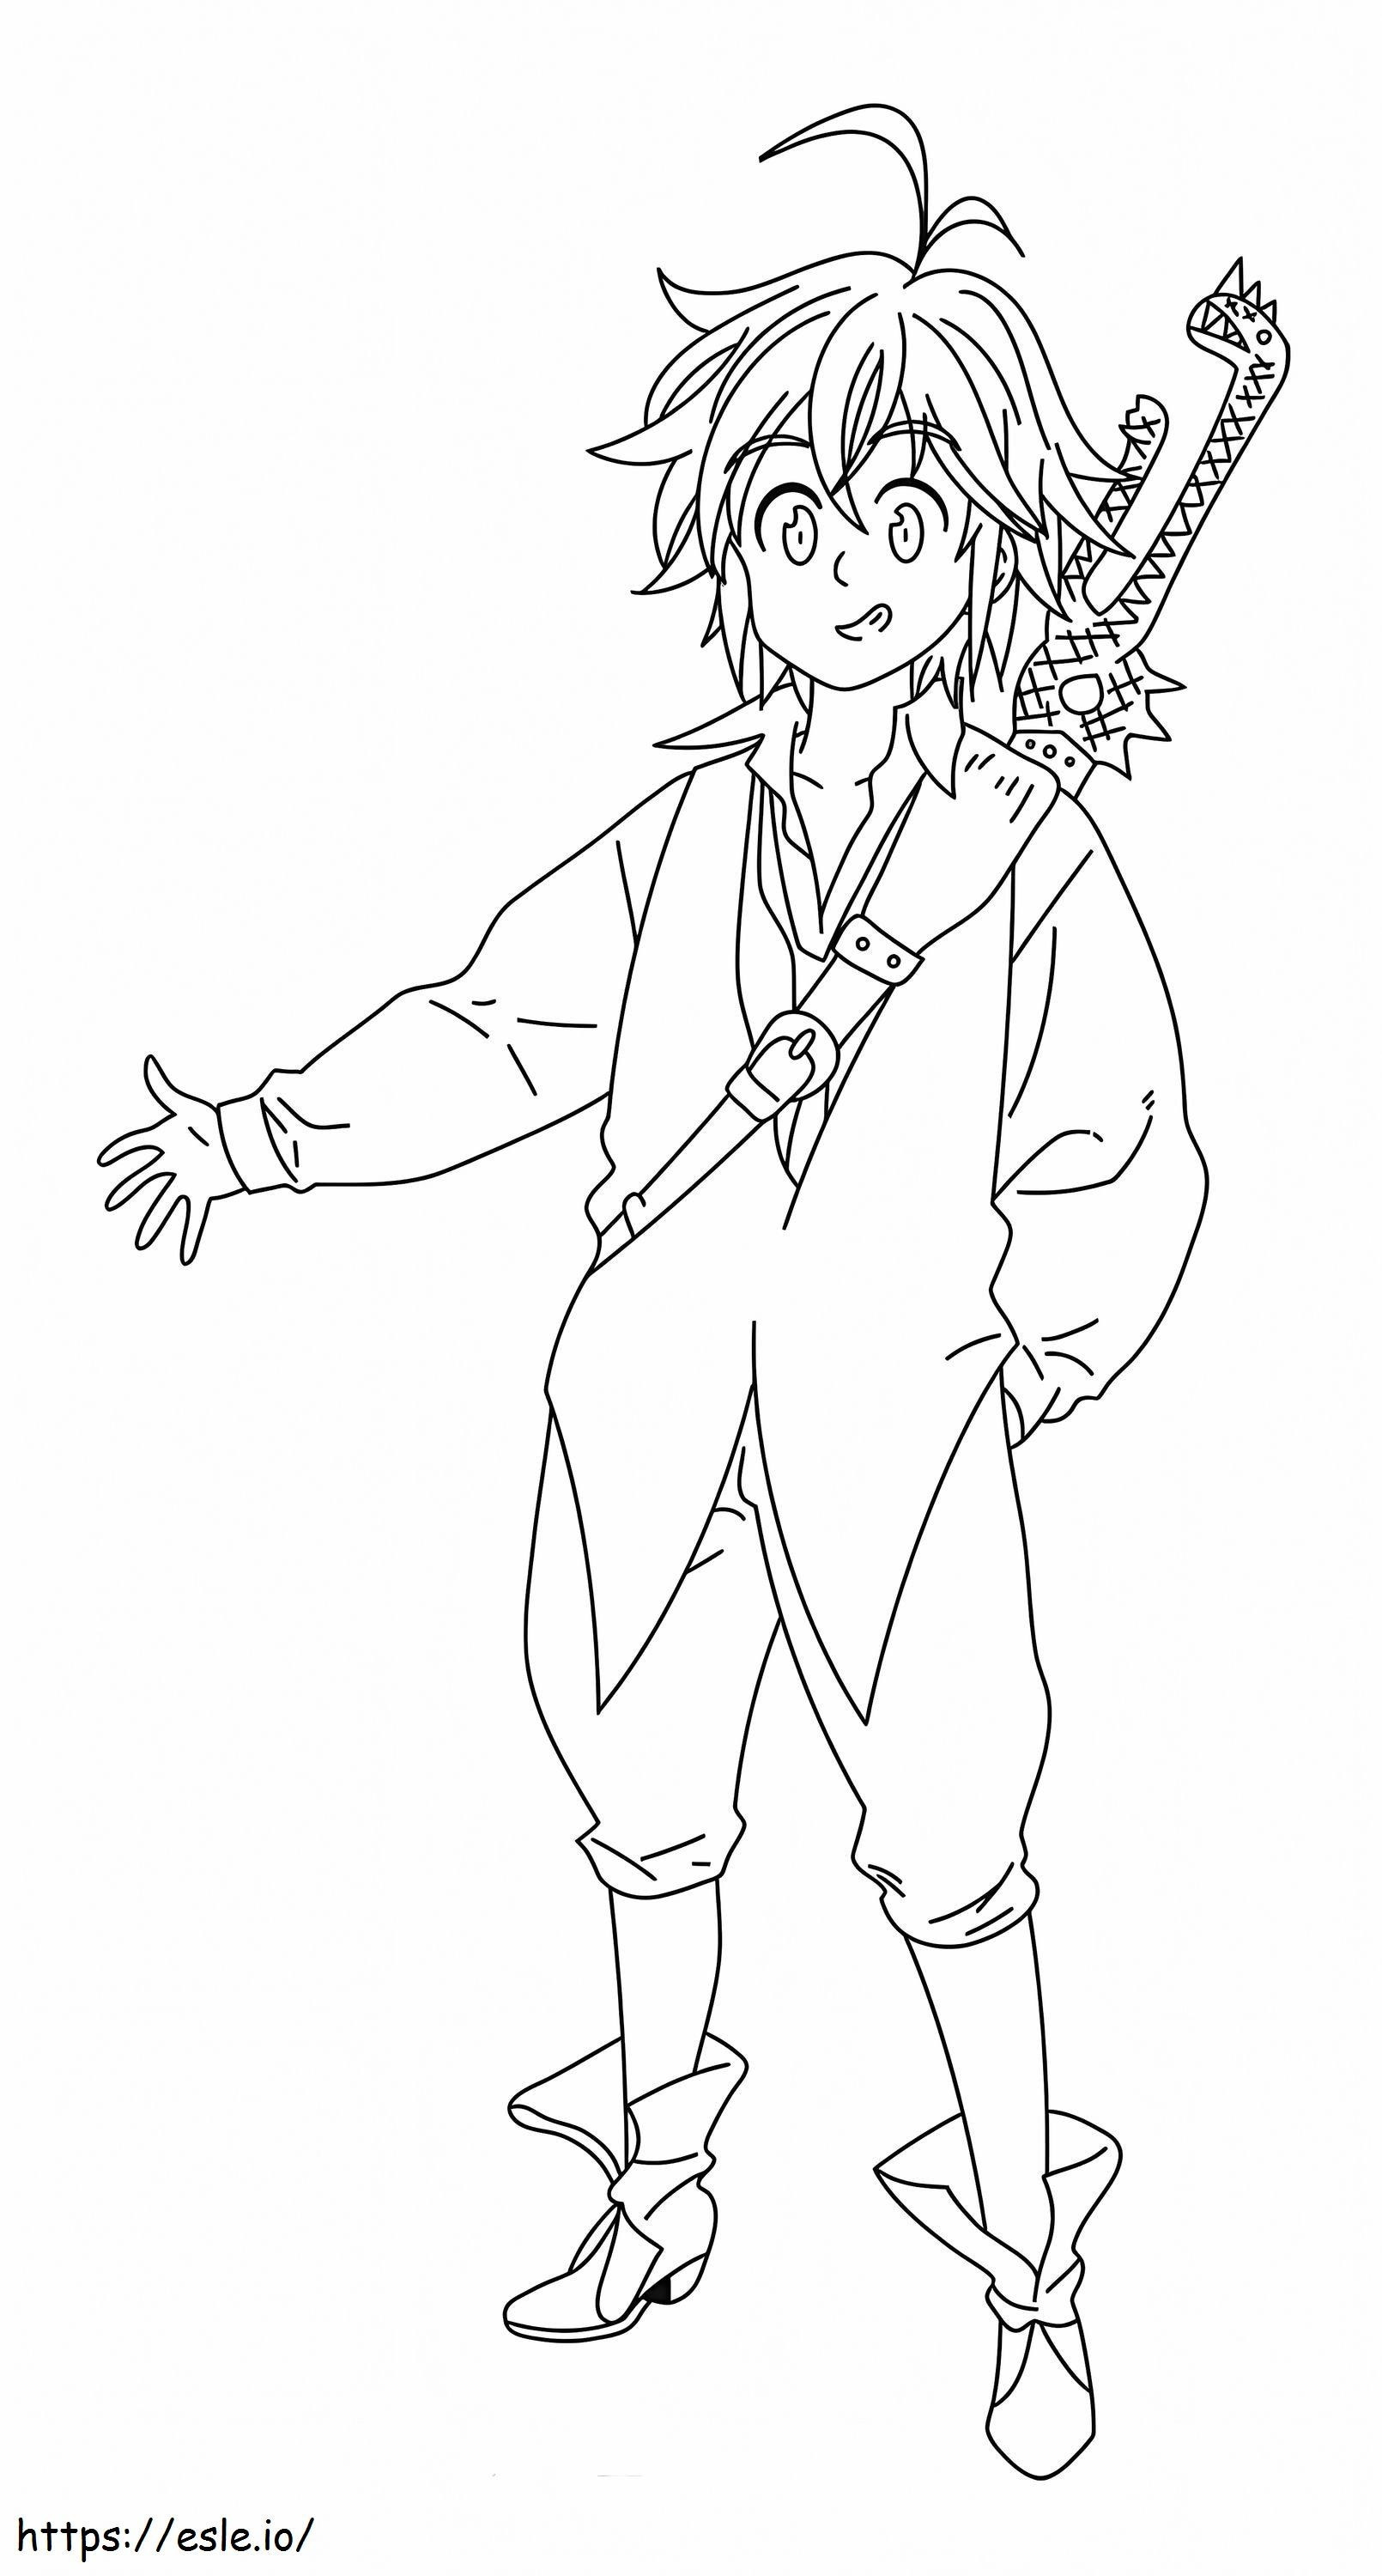 Meliodas Is The Leader Of The Seven Deadly Sins. coloring page